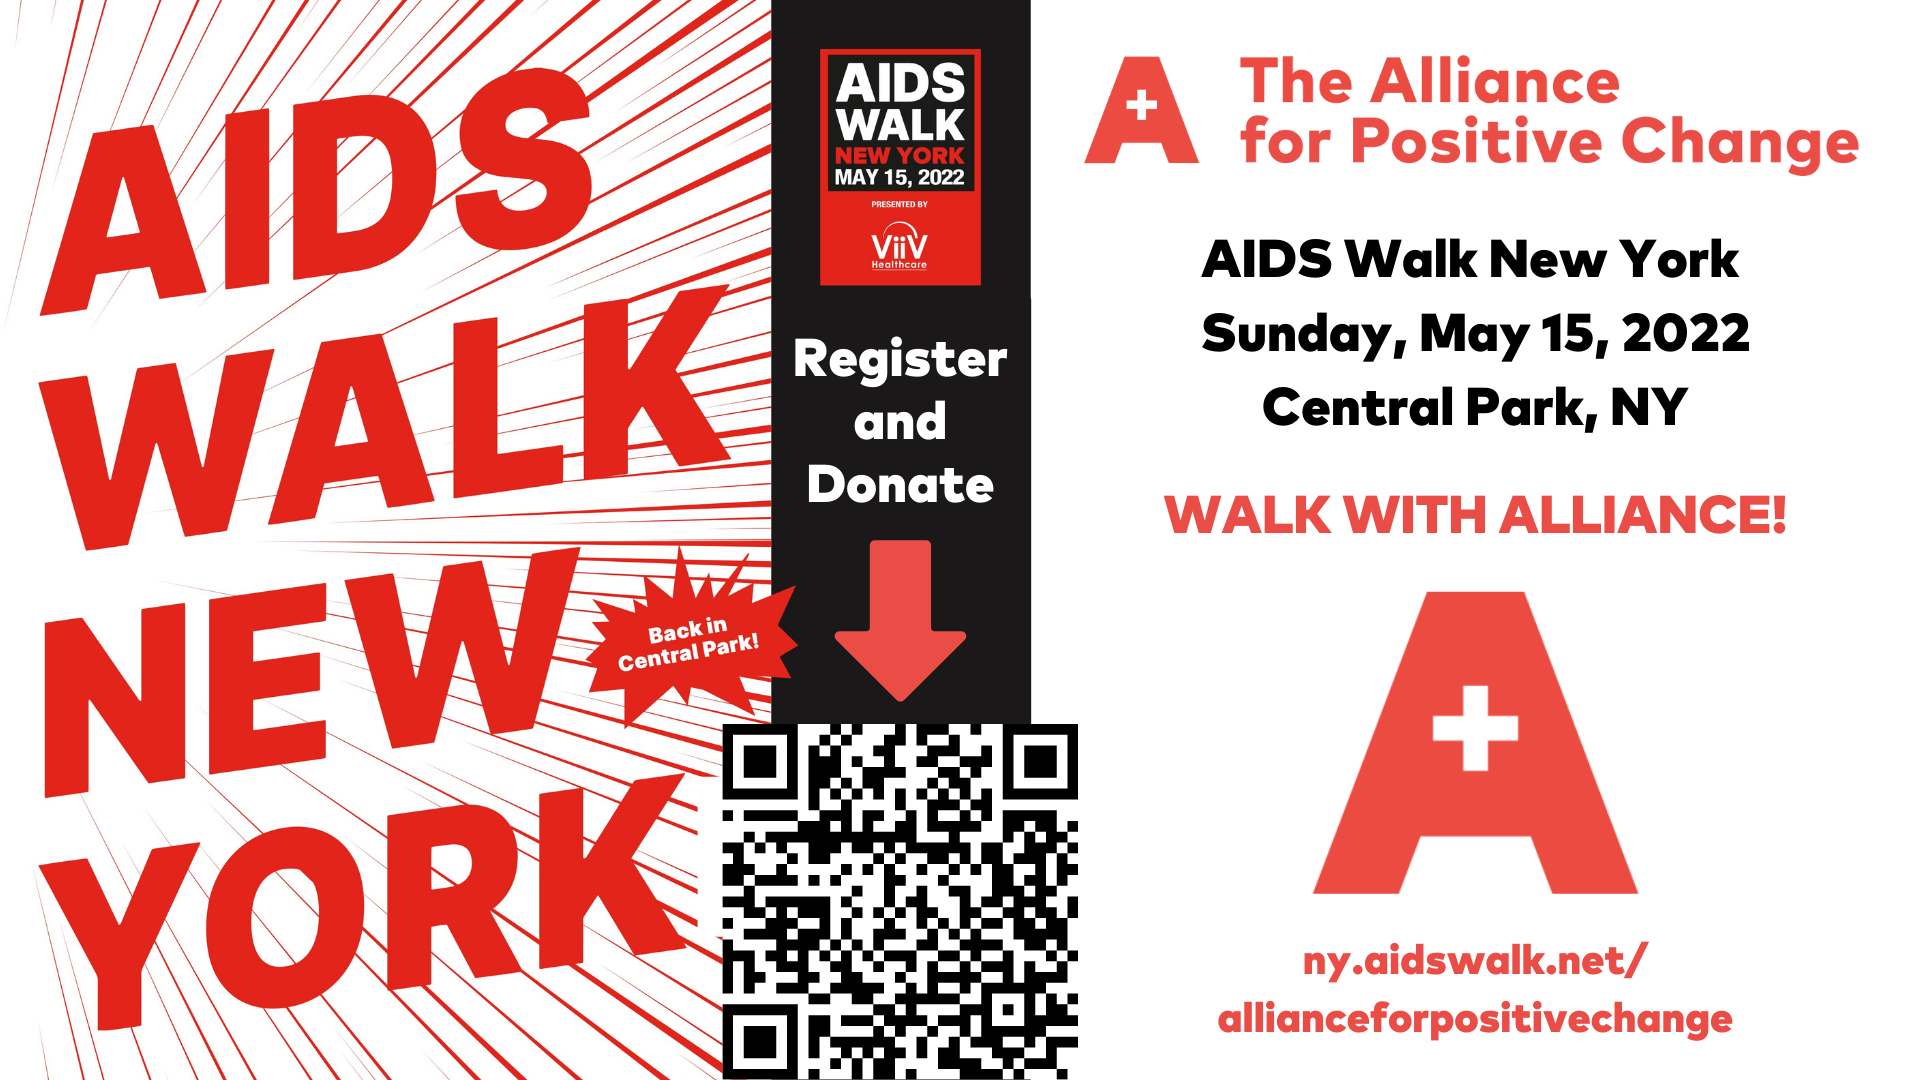 AIDS Walk NY with Alliance — The Alliance